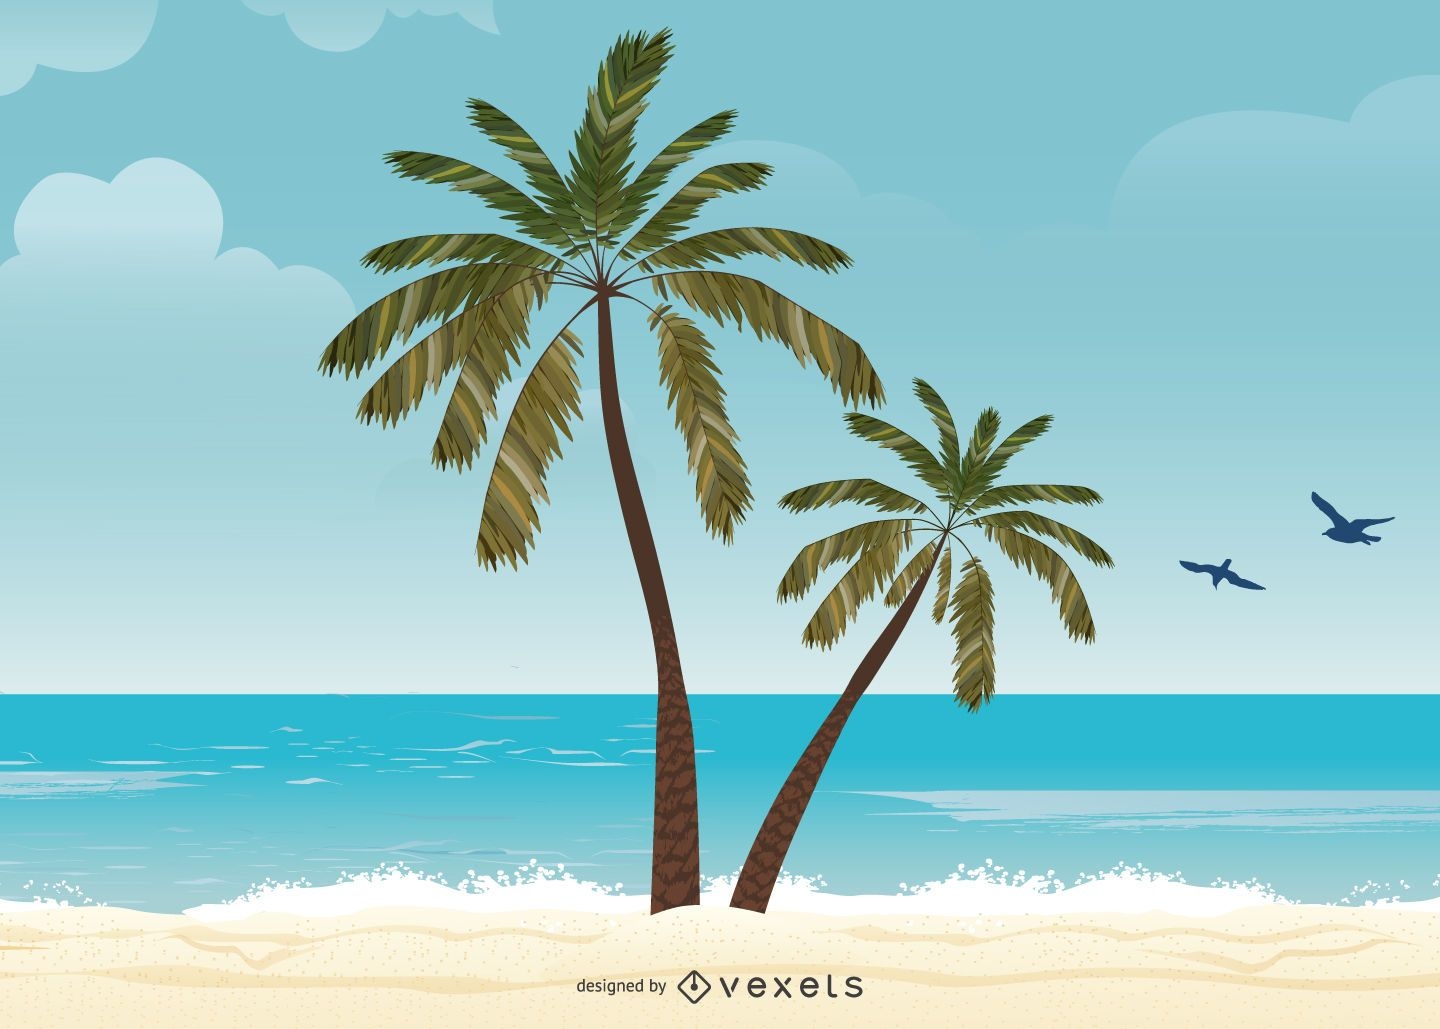 Summer island illustration with palm trees